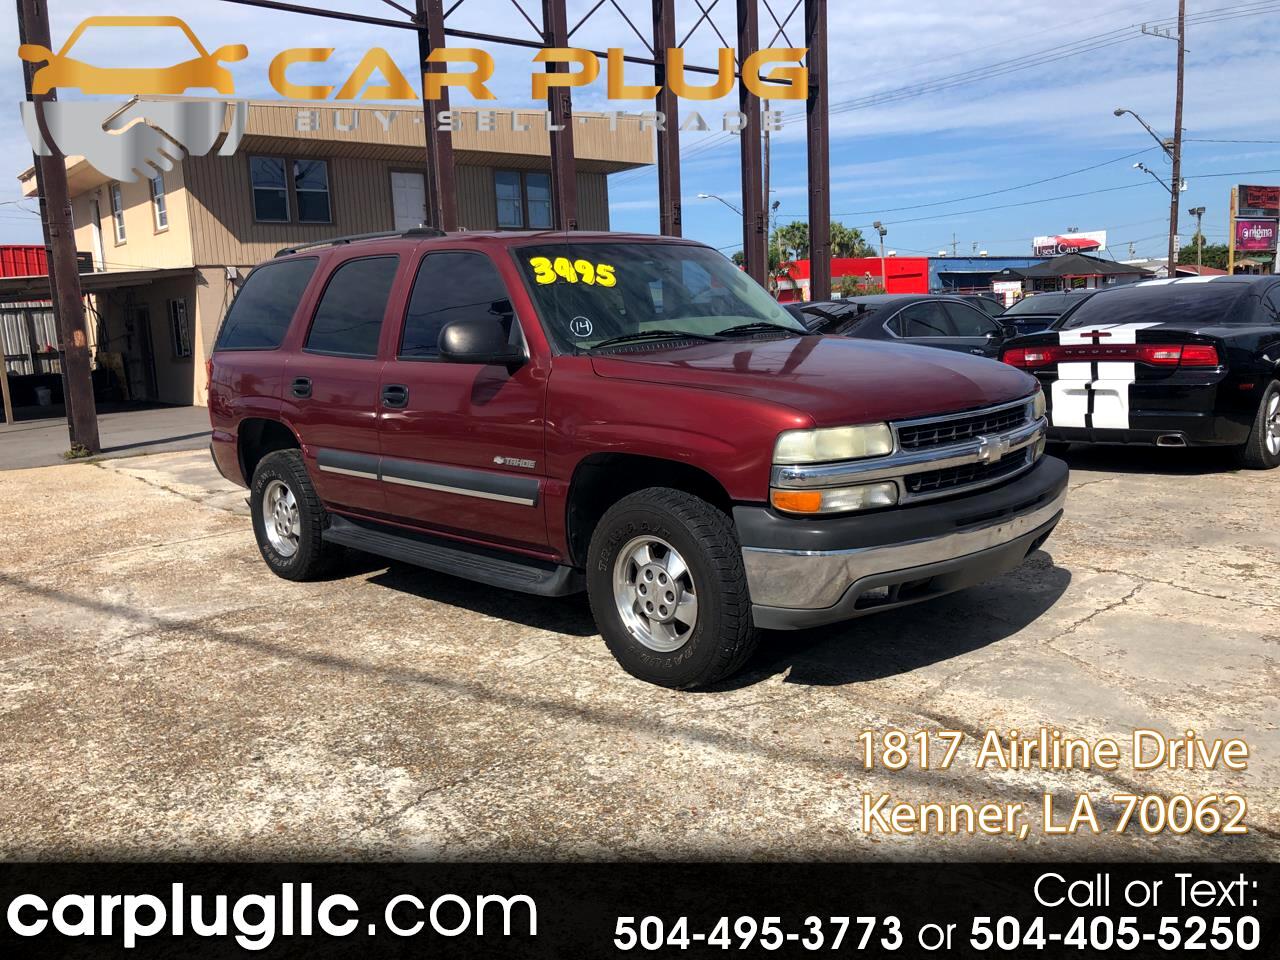 Used 2003 Chevrolet Tahoe 2wd For Sale In Metairie La 70006